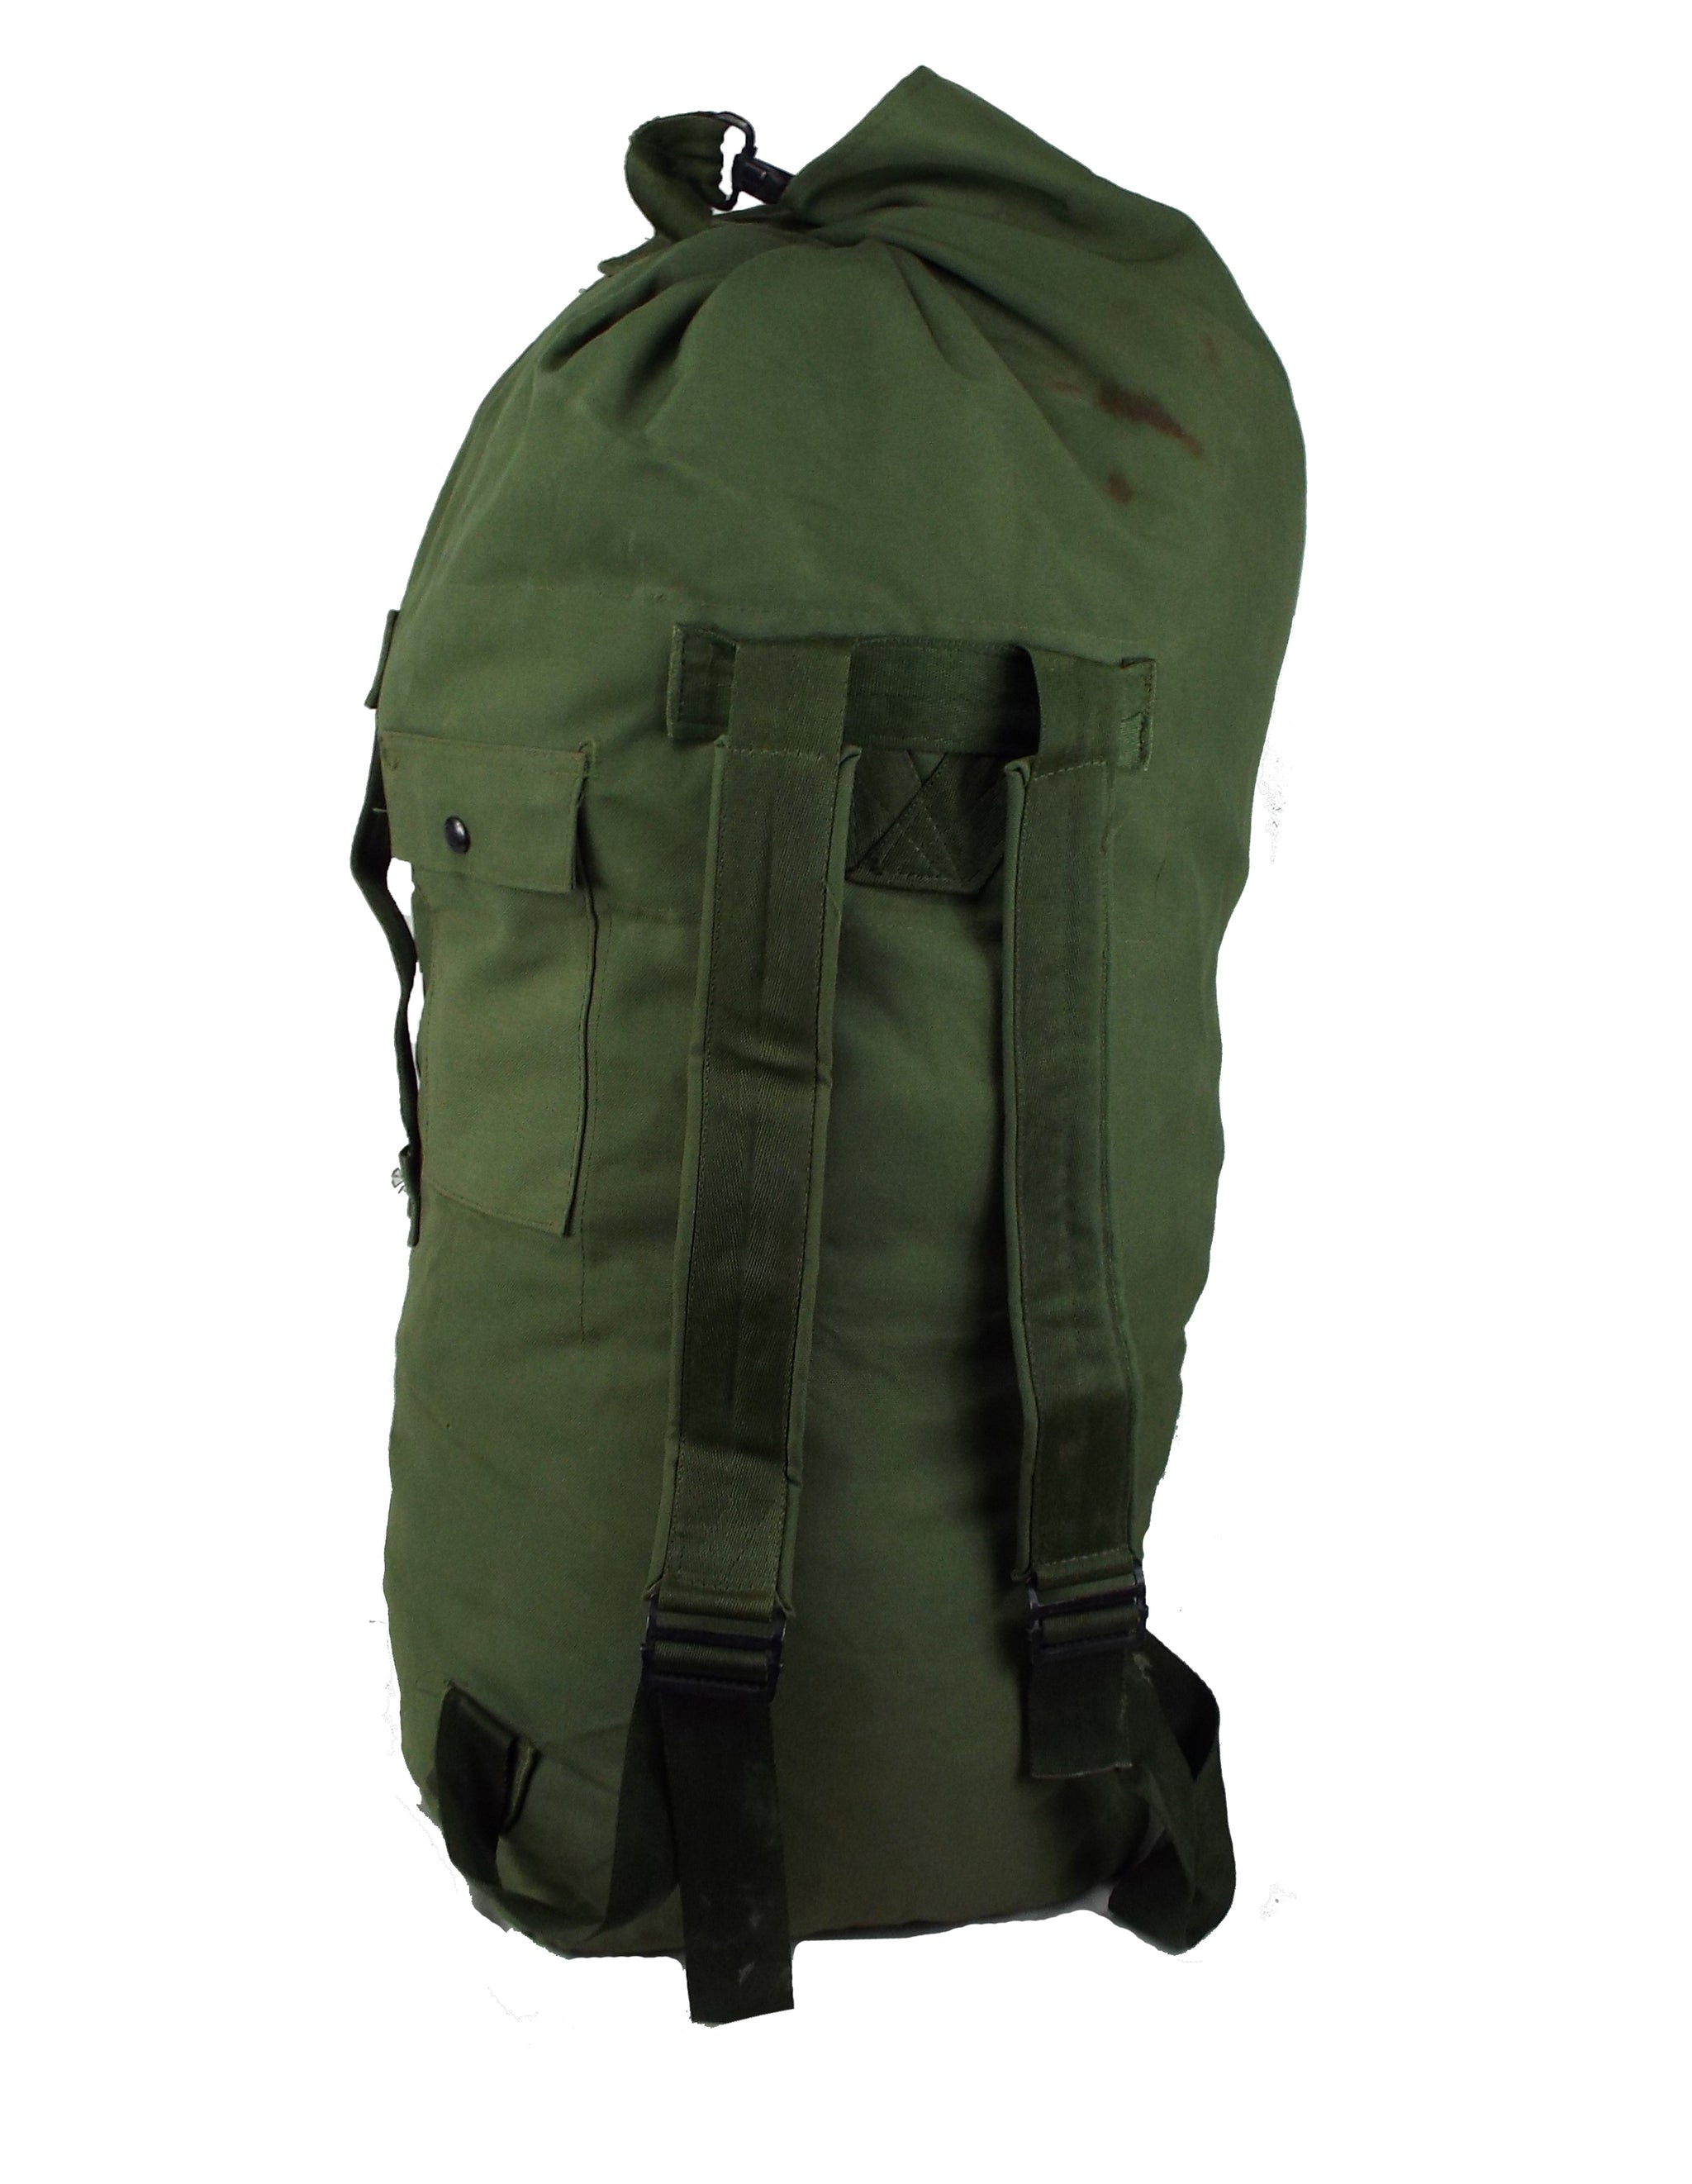 US Army - Kit Bag - 90 litre capacity approximately - DISTRESSED RANGE ...